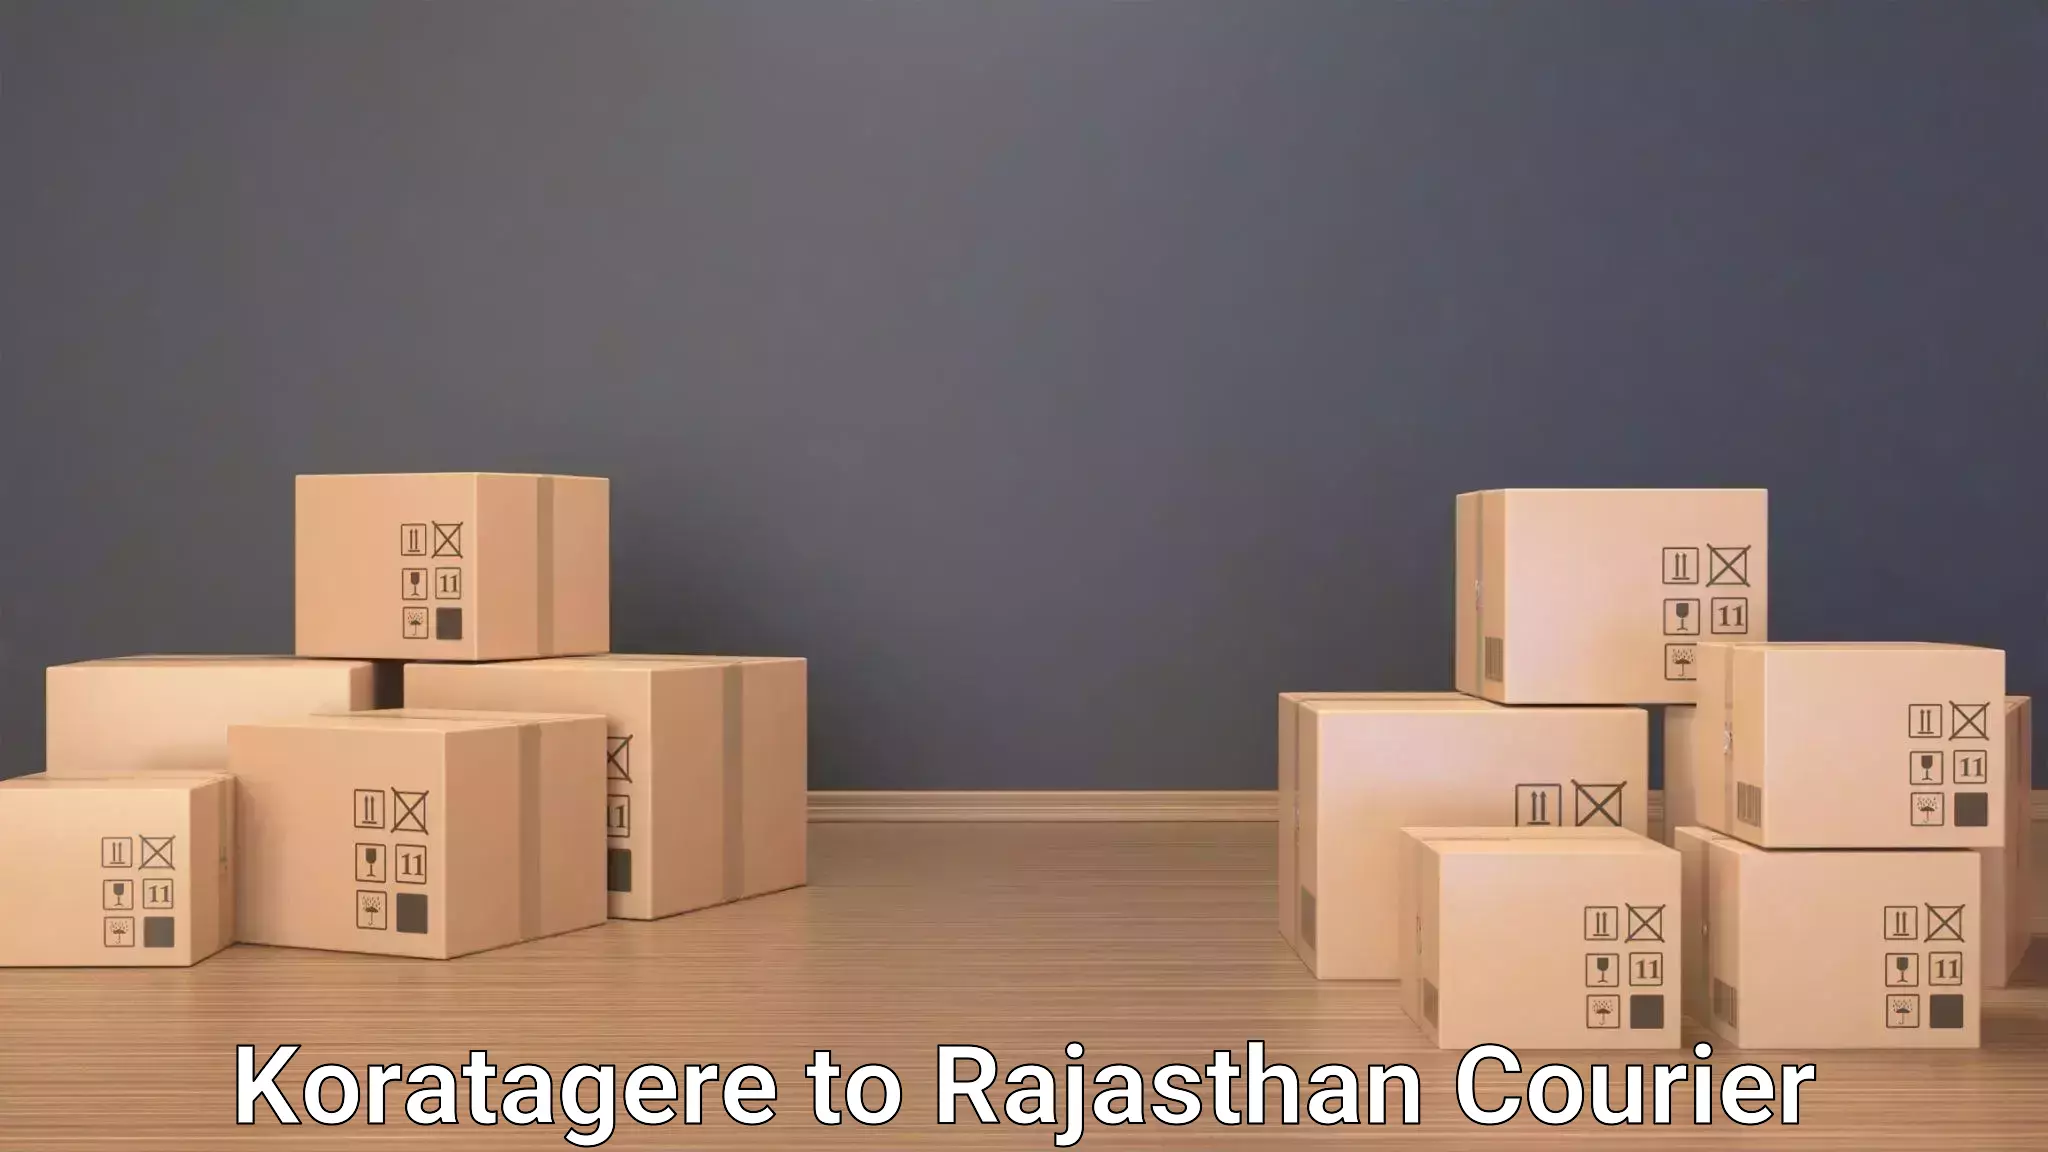 Luggage delivery app Koratagere to Laxmangarh